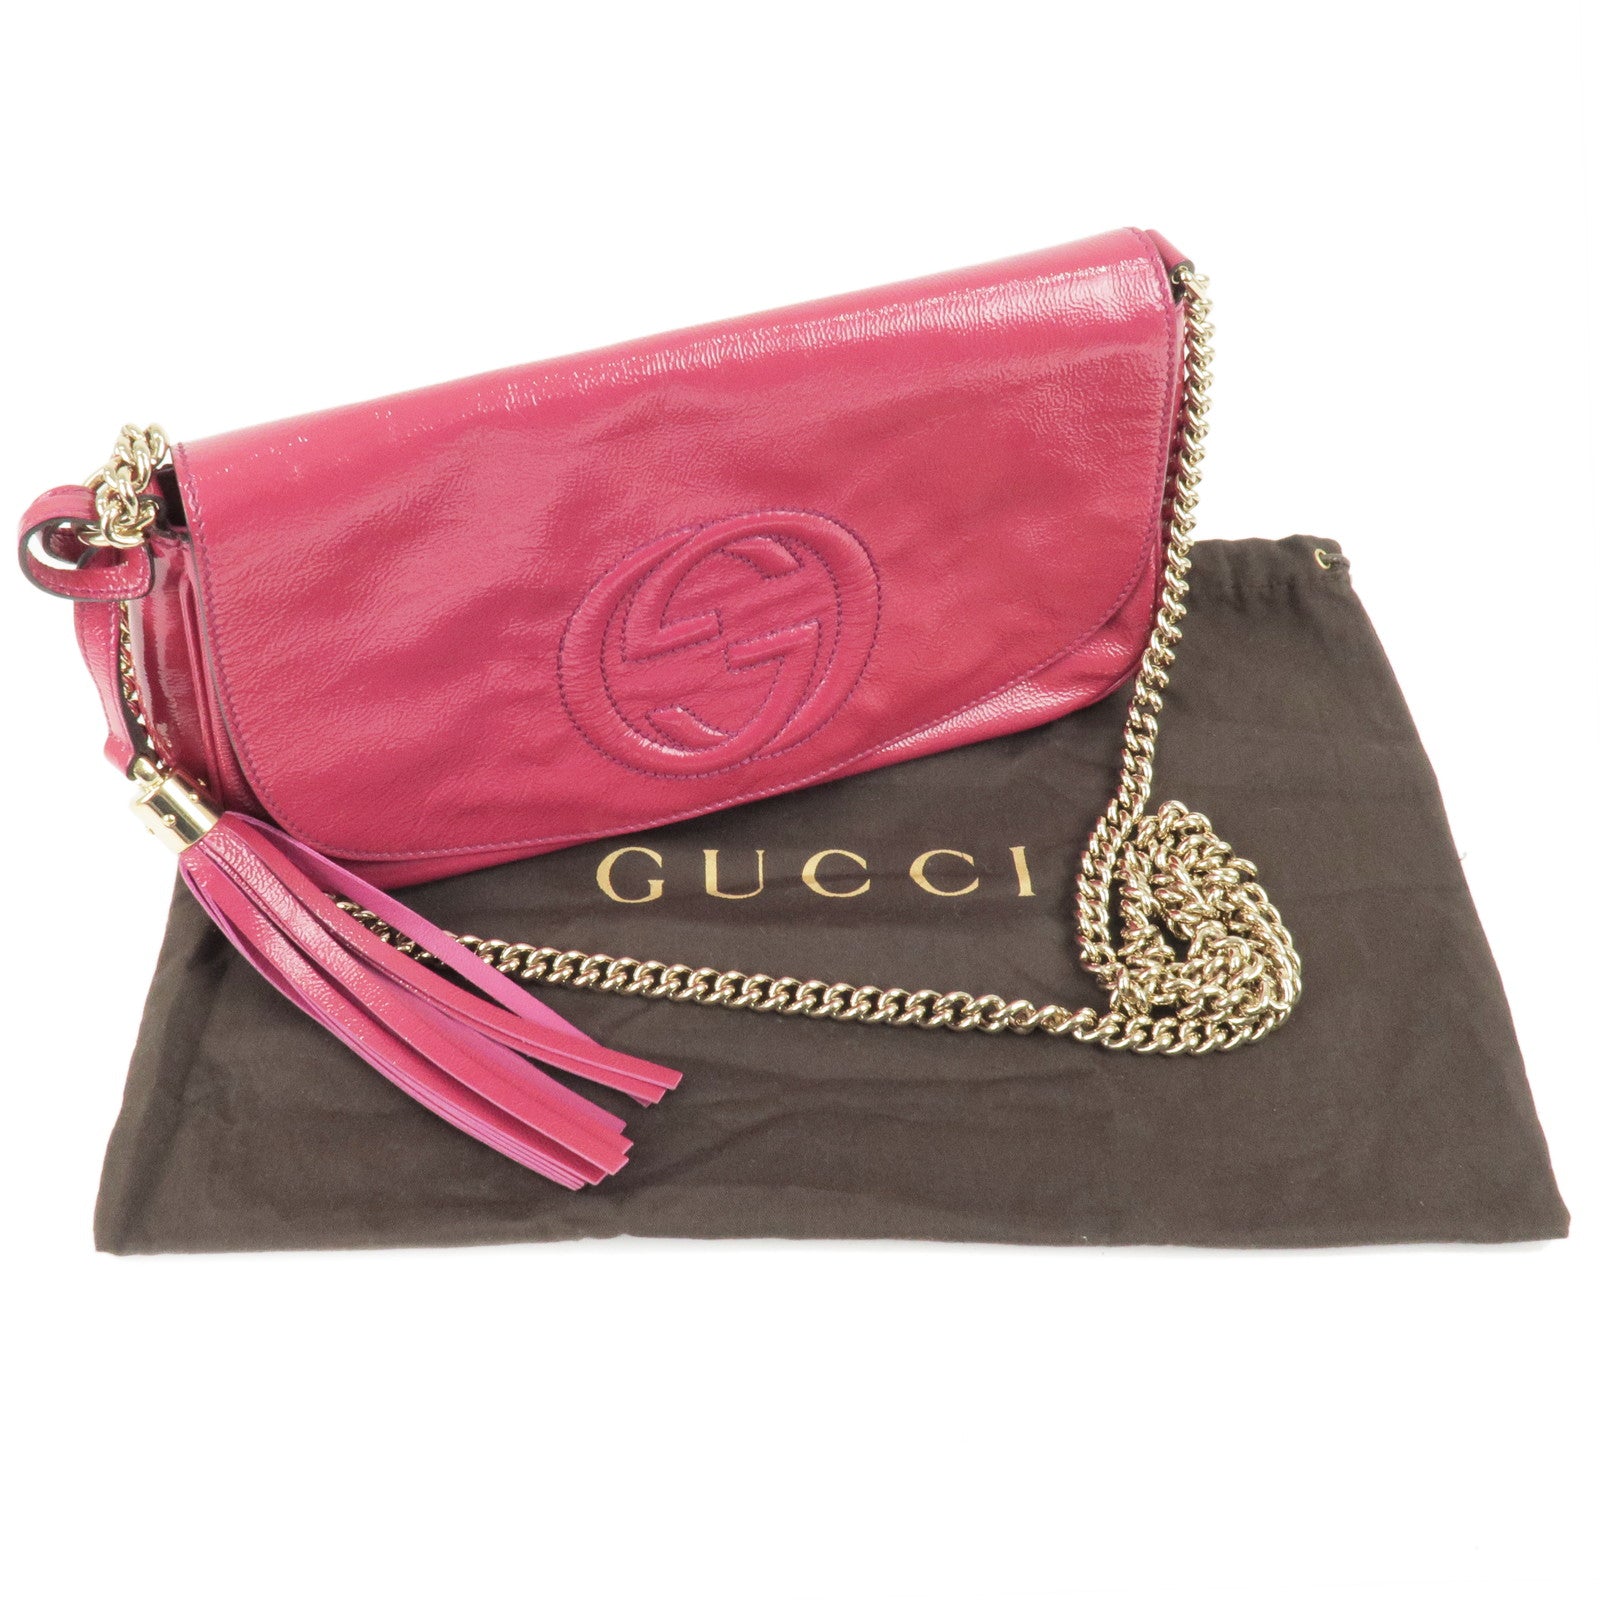 Gucci Bee Print Grained Leather Pouch in Brown